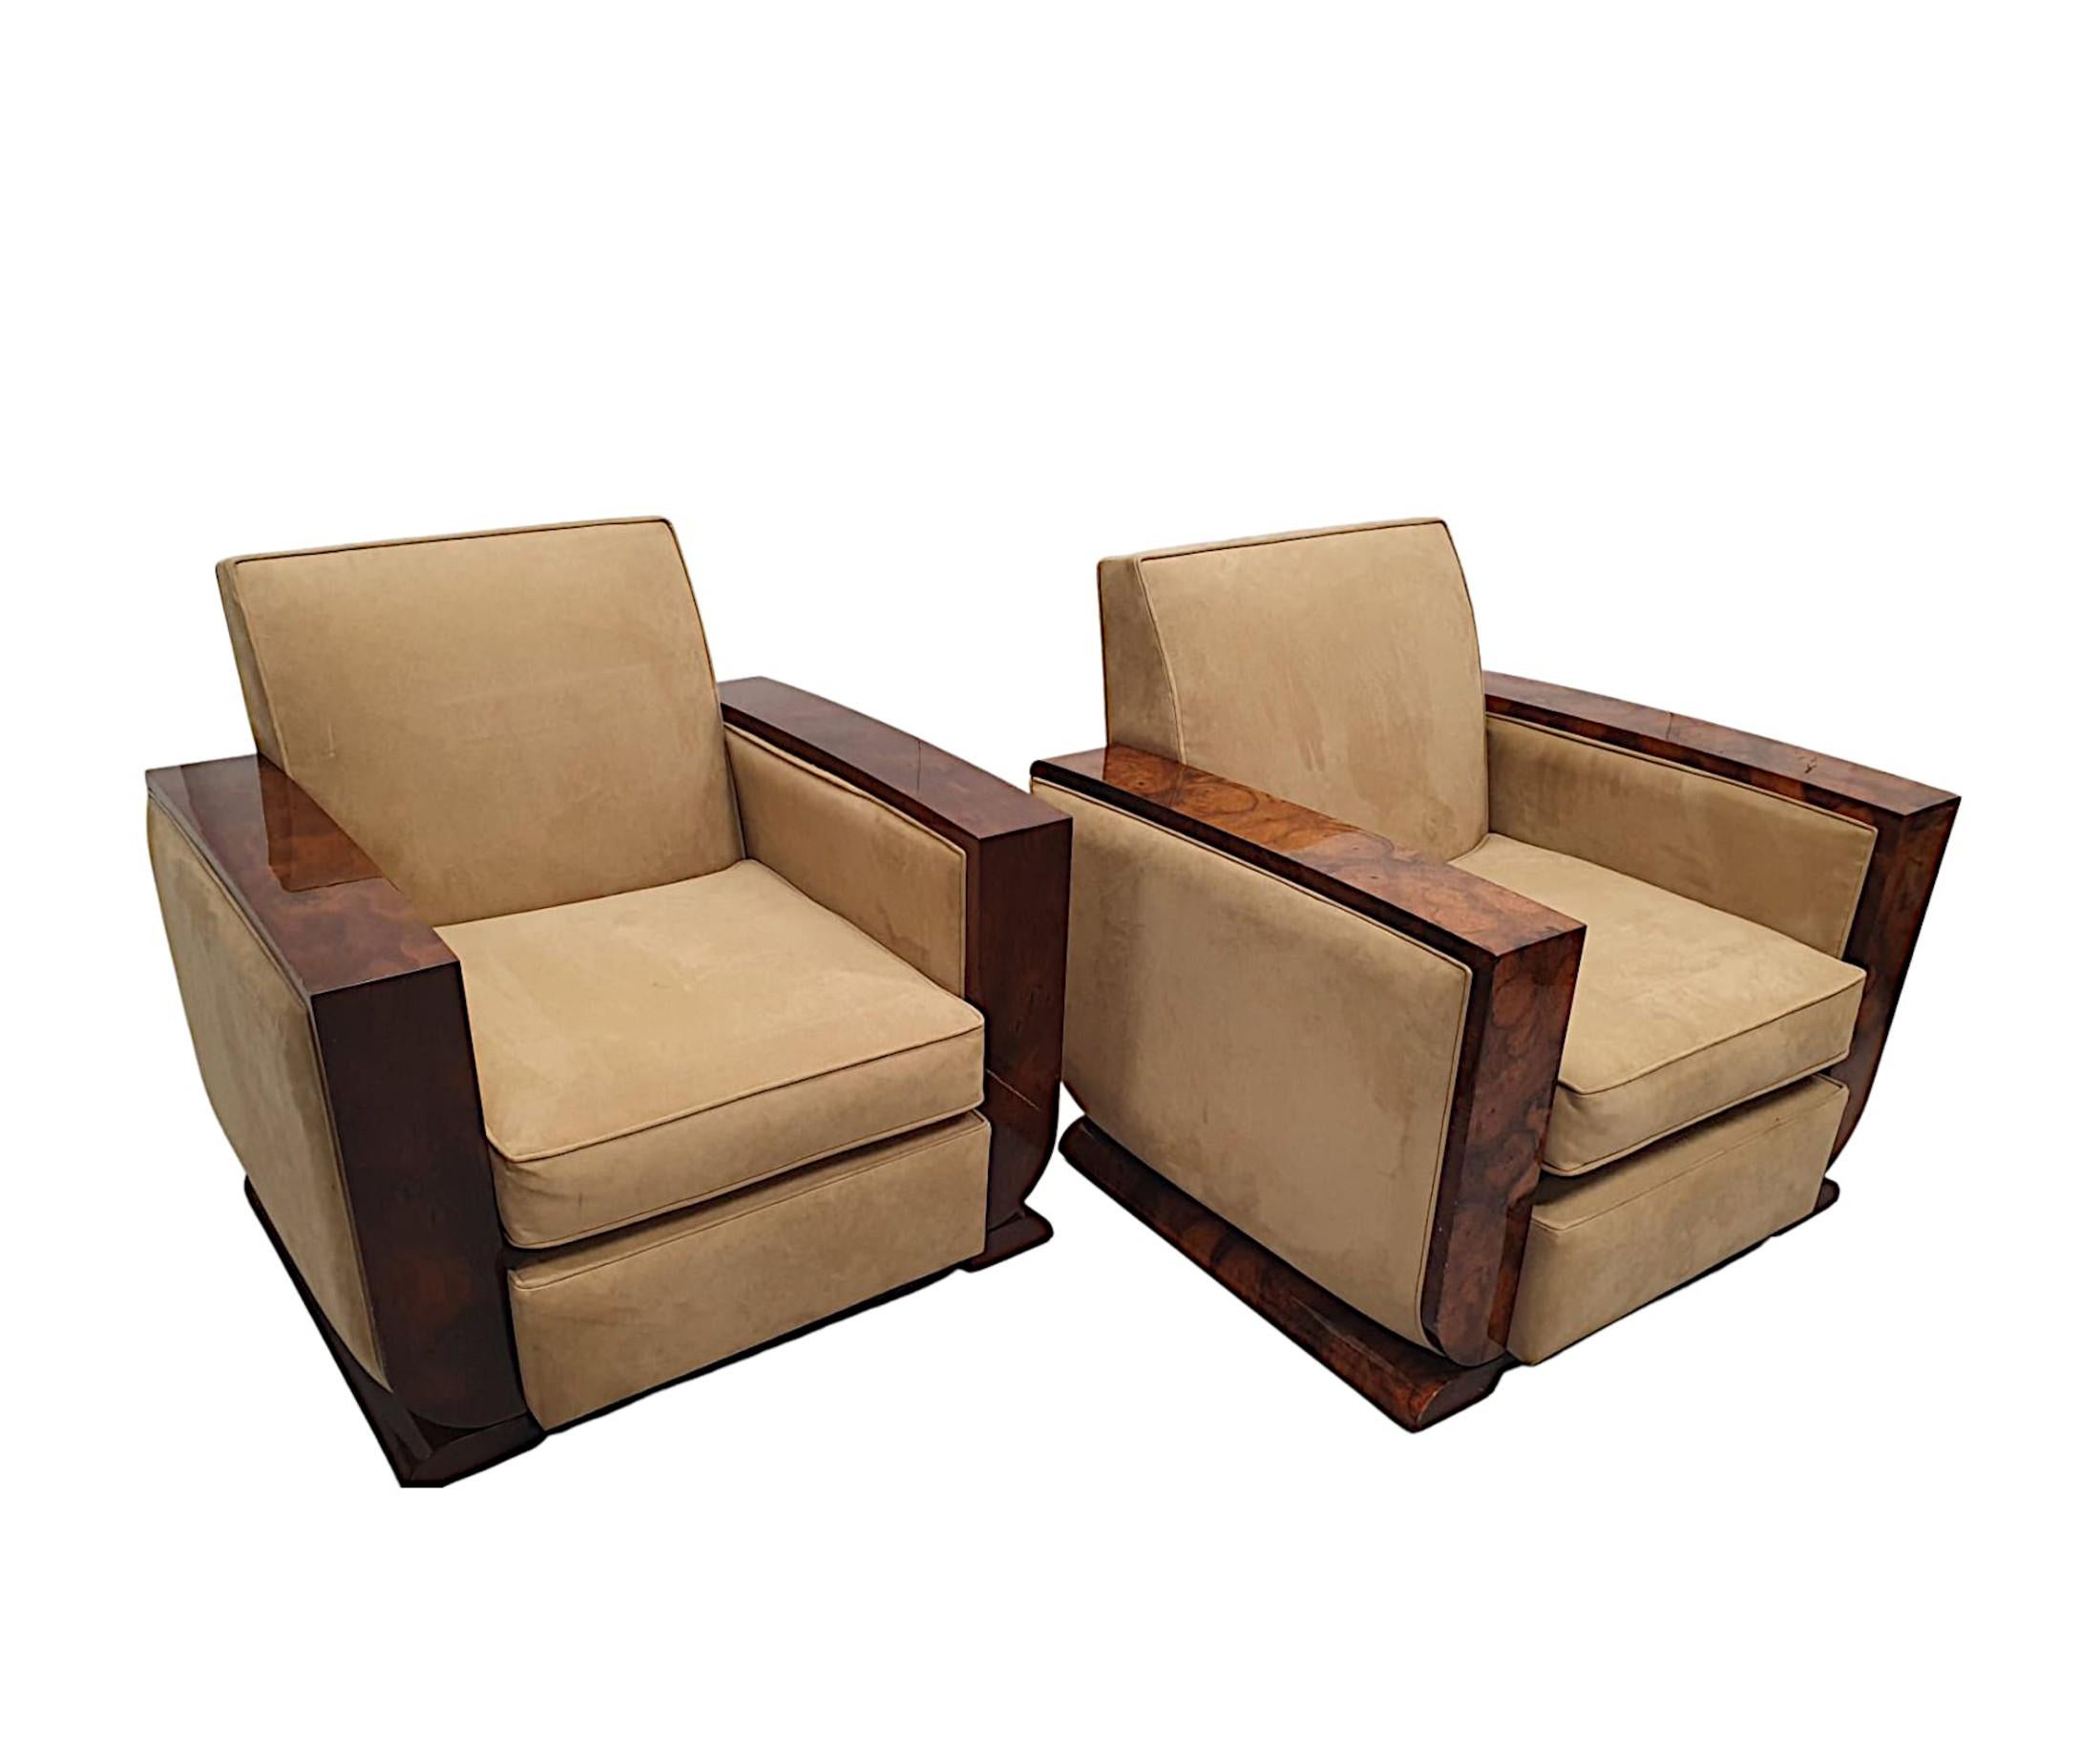 A fabulous pair of 20th Century armchairs in the Art Deco style. The cushioned back and seat beautifully upholstered in cream suede with piping detail, flanked by richly patinated burr walnut show timber detail to the arms.